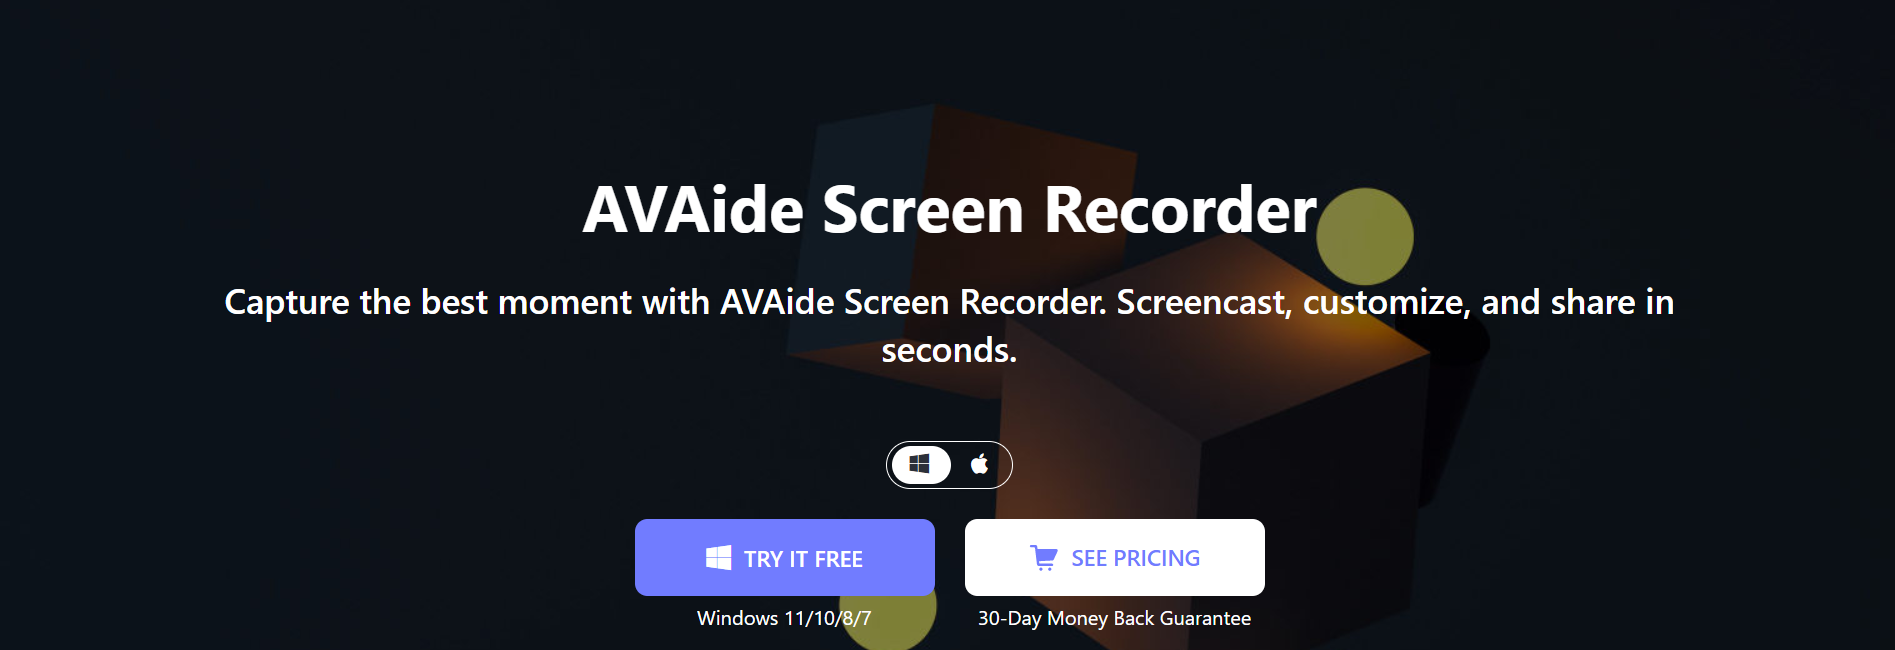 AVAide - Top 5 Professional Screen Recorder or Video Editor